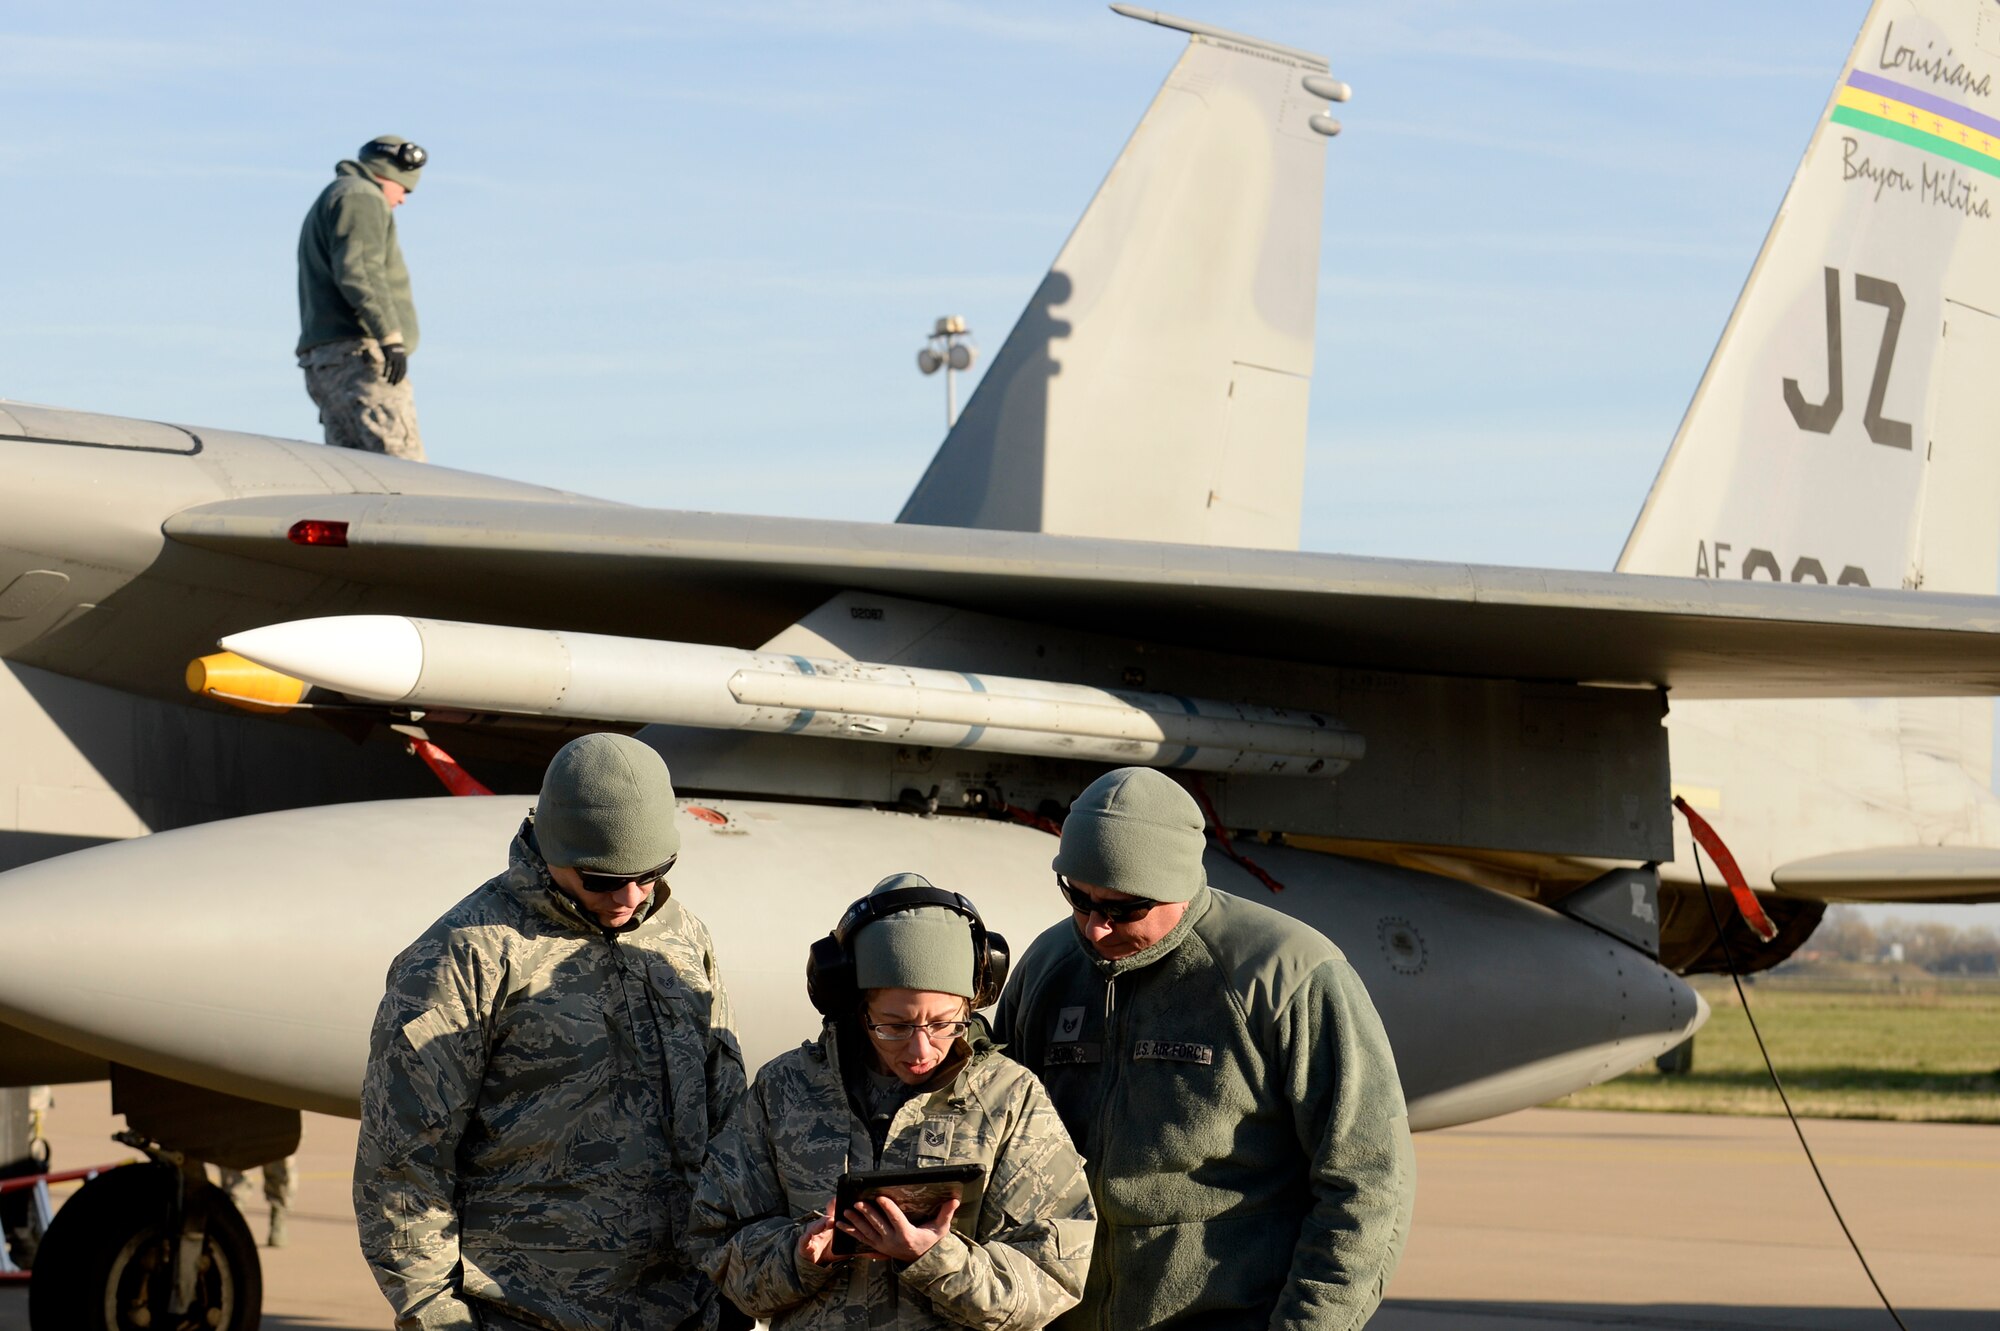 Airmen from the 122nd Expeditionary Fighter Squadron perform maintenance at Leeuwarden Air Base, Netherlands, March 24, 2017. F-15C's from the Lousiana and Florida Air National Guard's 159th EFS deployed to Europe to participate in a Theater Security Package. These F-15s will conduct training alongside NATO allies to strengthen interoperability and to demonstrate U.S. commitment to the security and stability of Europe. (U.S. Air Force photo by Tech. Sgt. Staci Miller)


	
